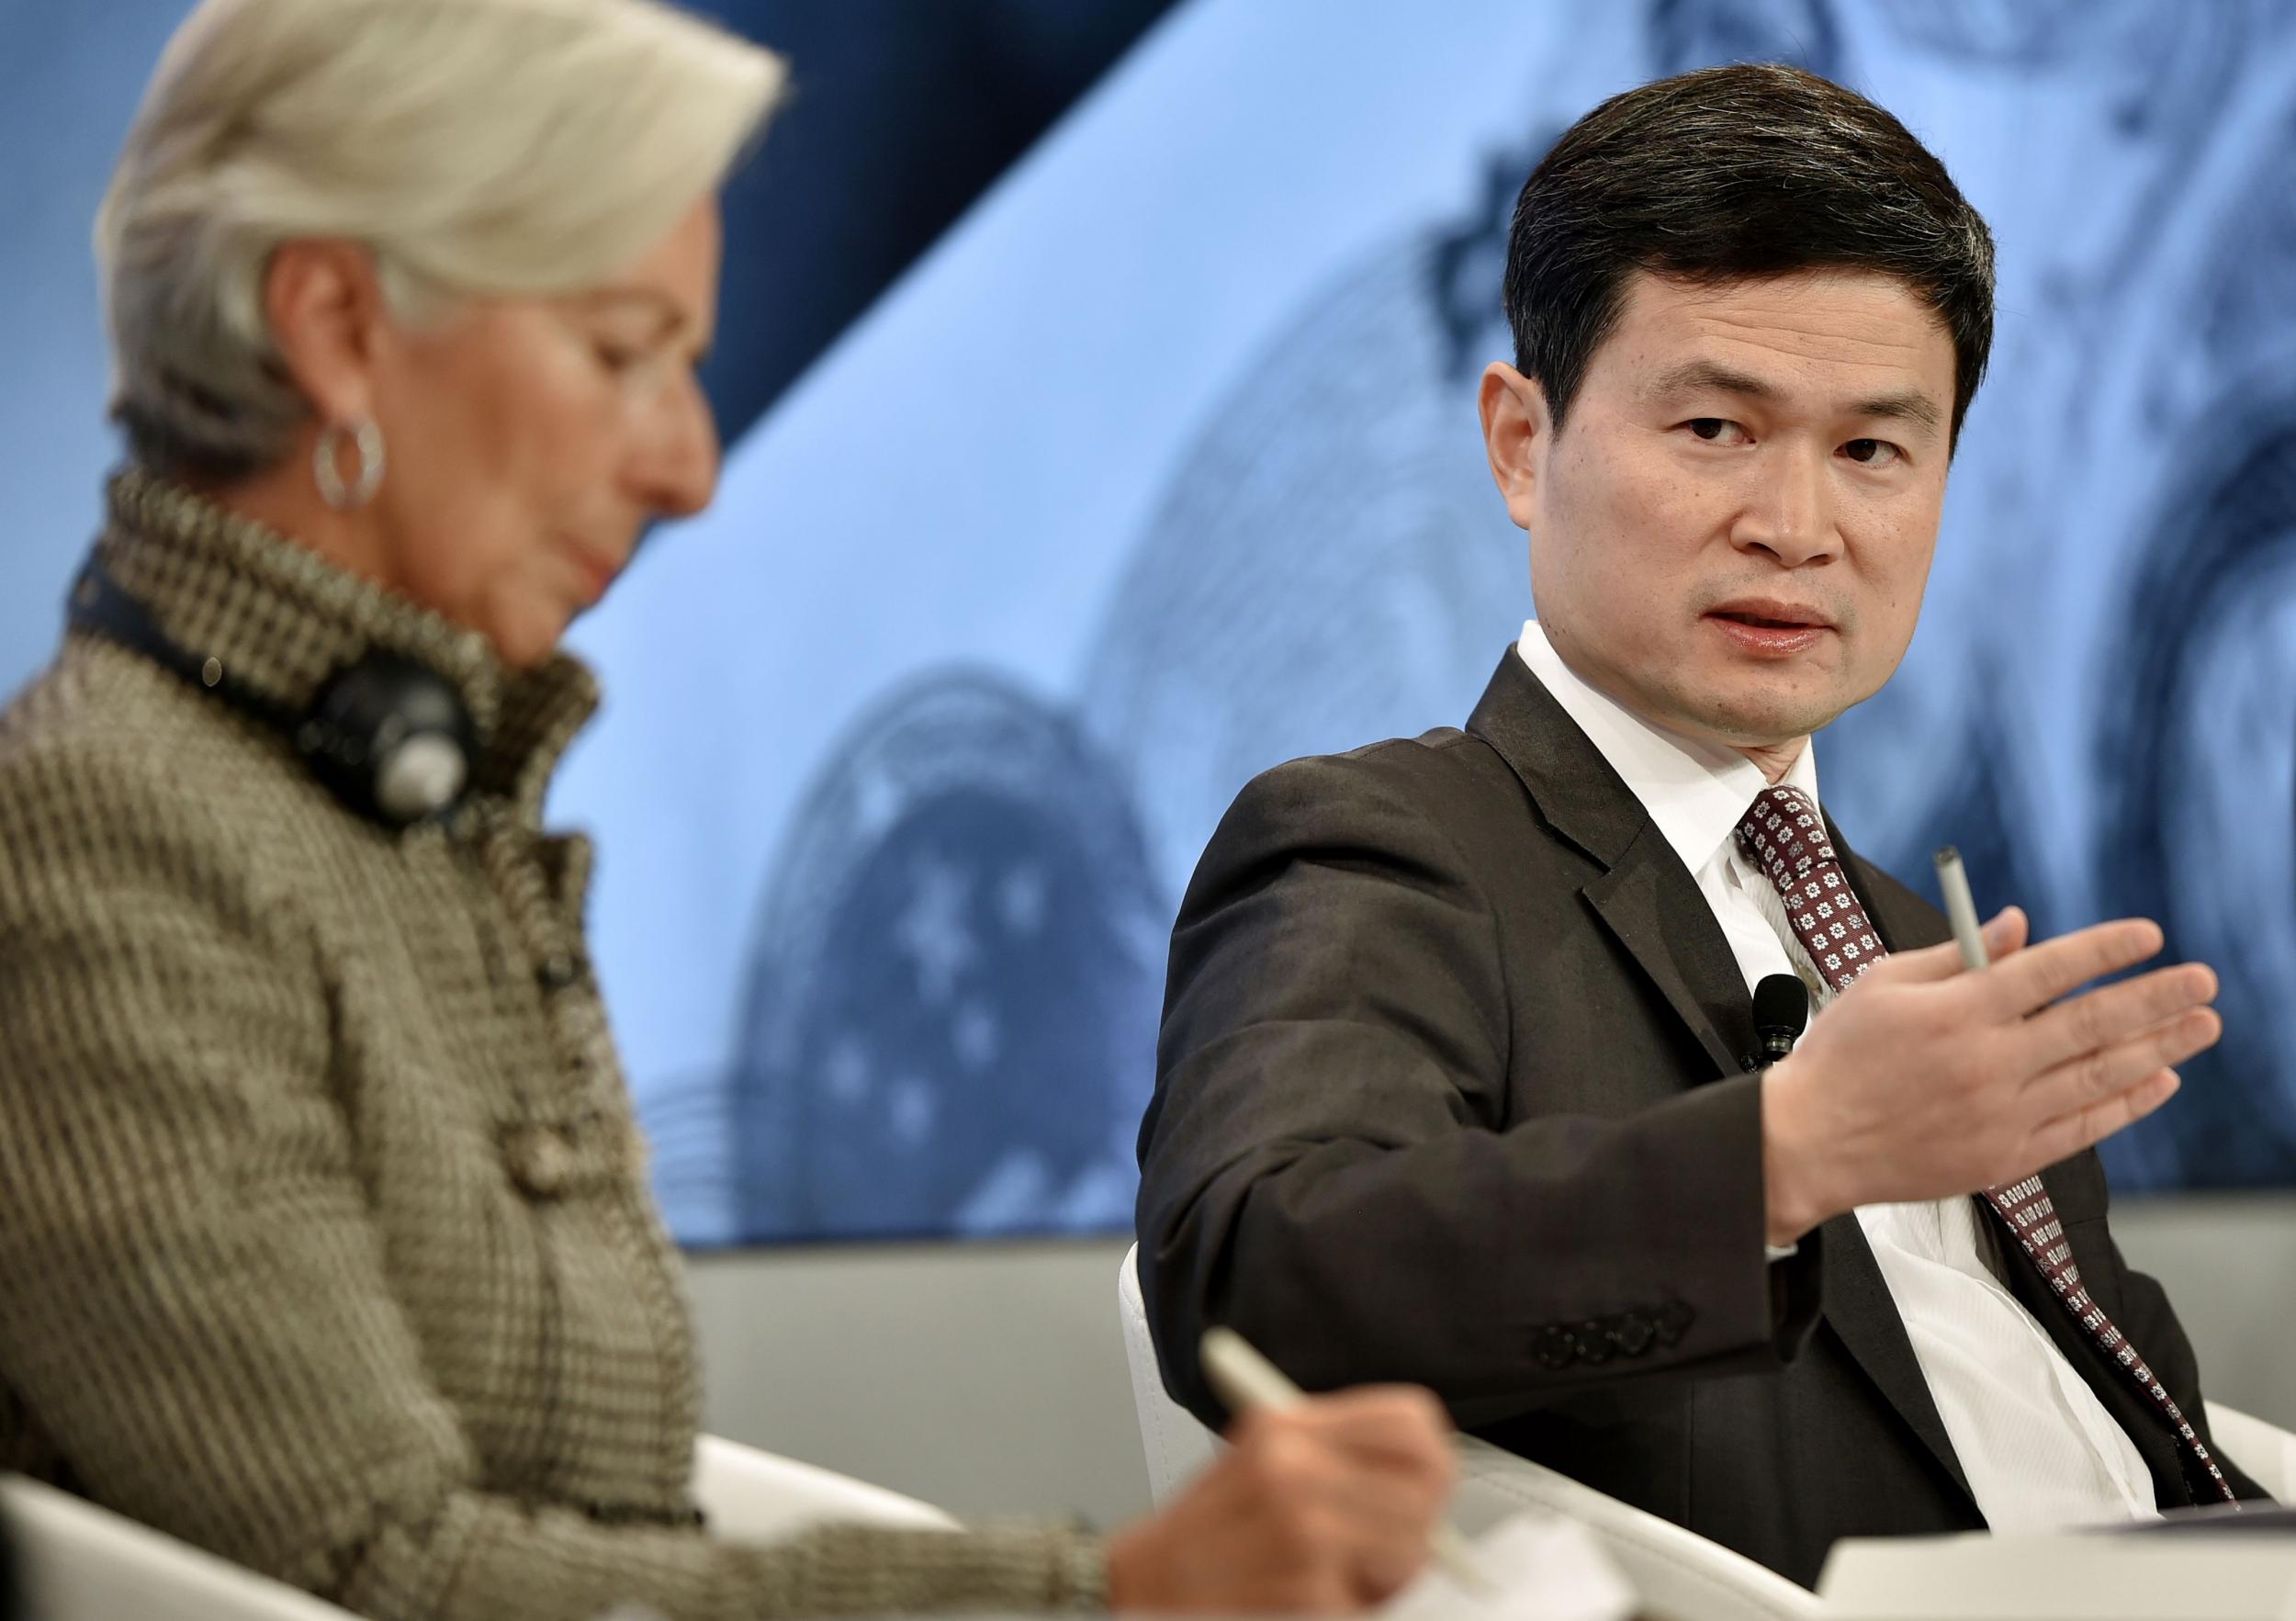 Chinese Central Leading Group for Financial and Economic's Fang Xinghai (R) gestures next to International Monetary Fund (IMF) Managing Director Christine Lagarde during a session at the World Economic Forum (WEF) annual meeting in Davos, on January 21, 2016.